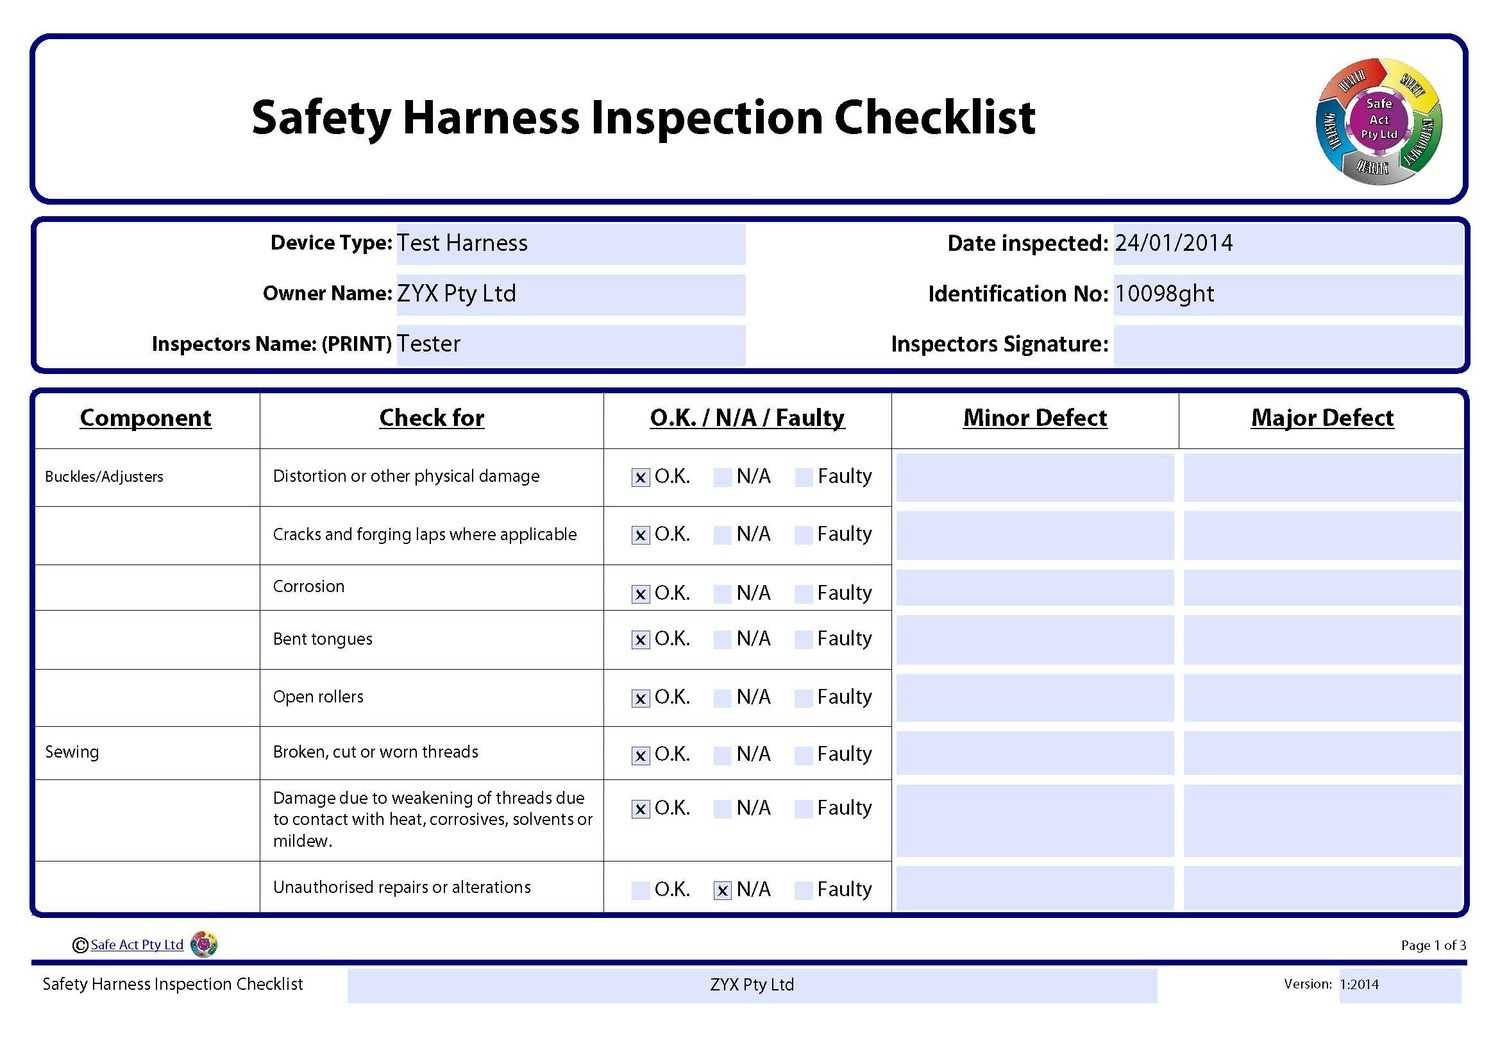 Safety Harness Inspection Checklist With Certificate Of Inspection Template